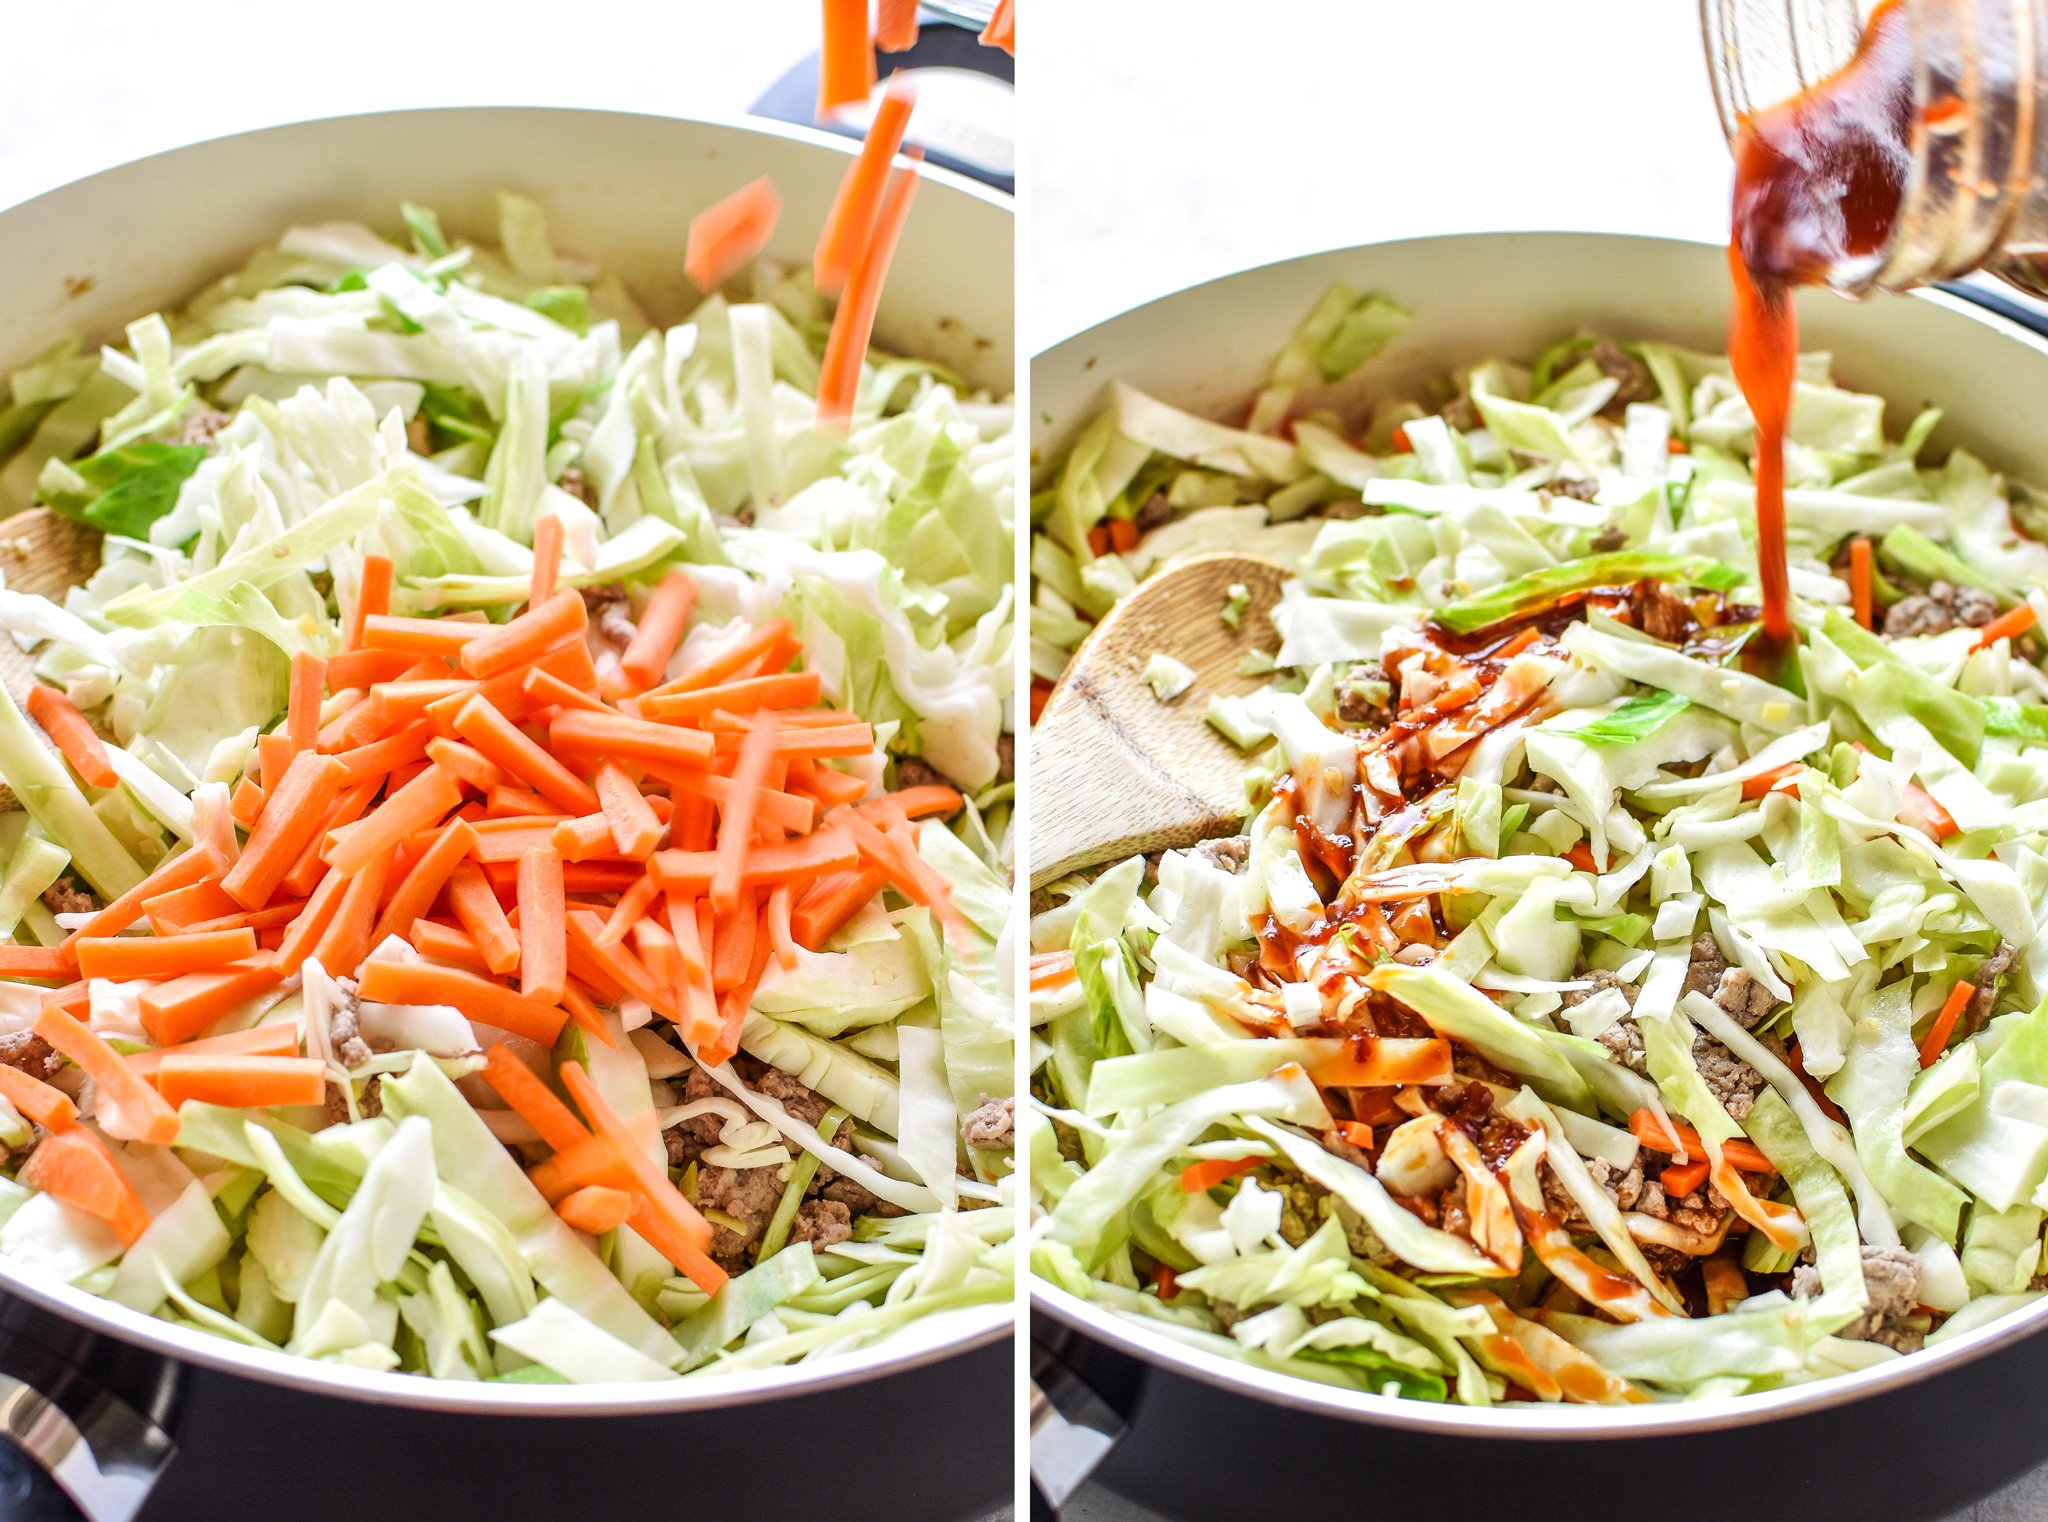 Left: Adding carrots to the pan. Right: Adding sauce mixture to the pan of spicy ground turkey & cabbage stir fry.